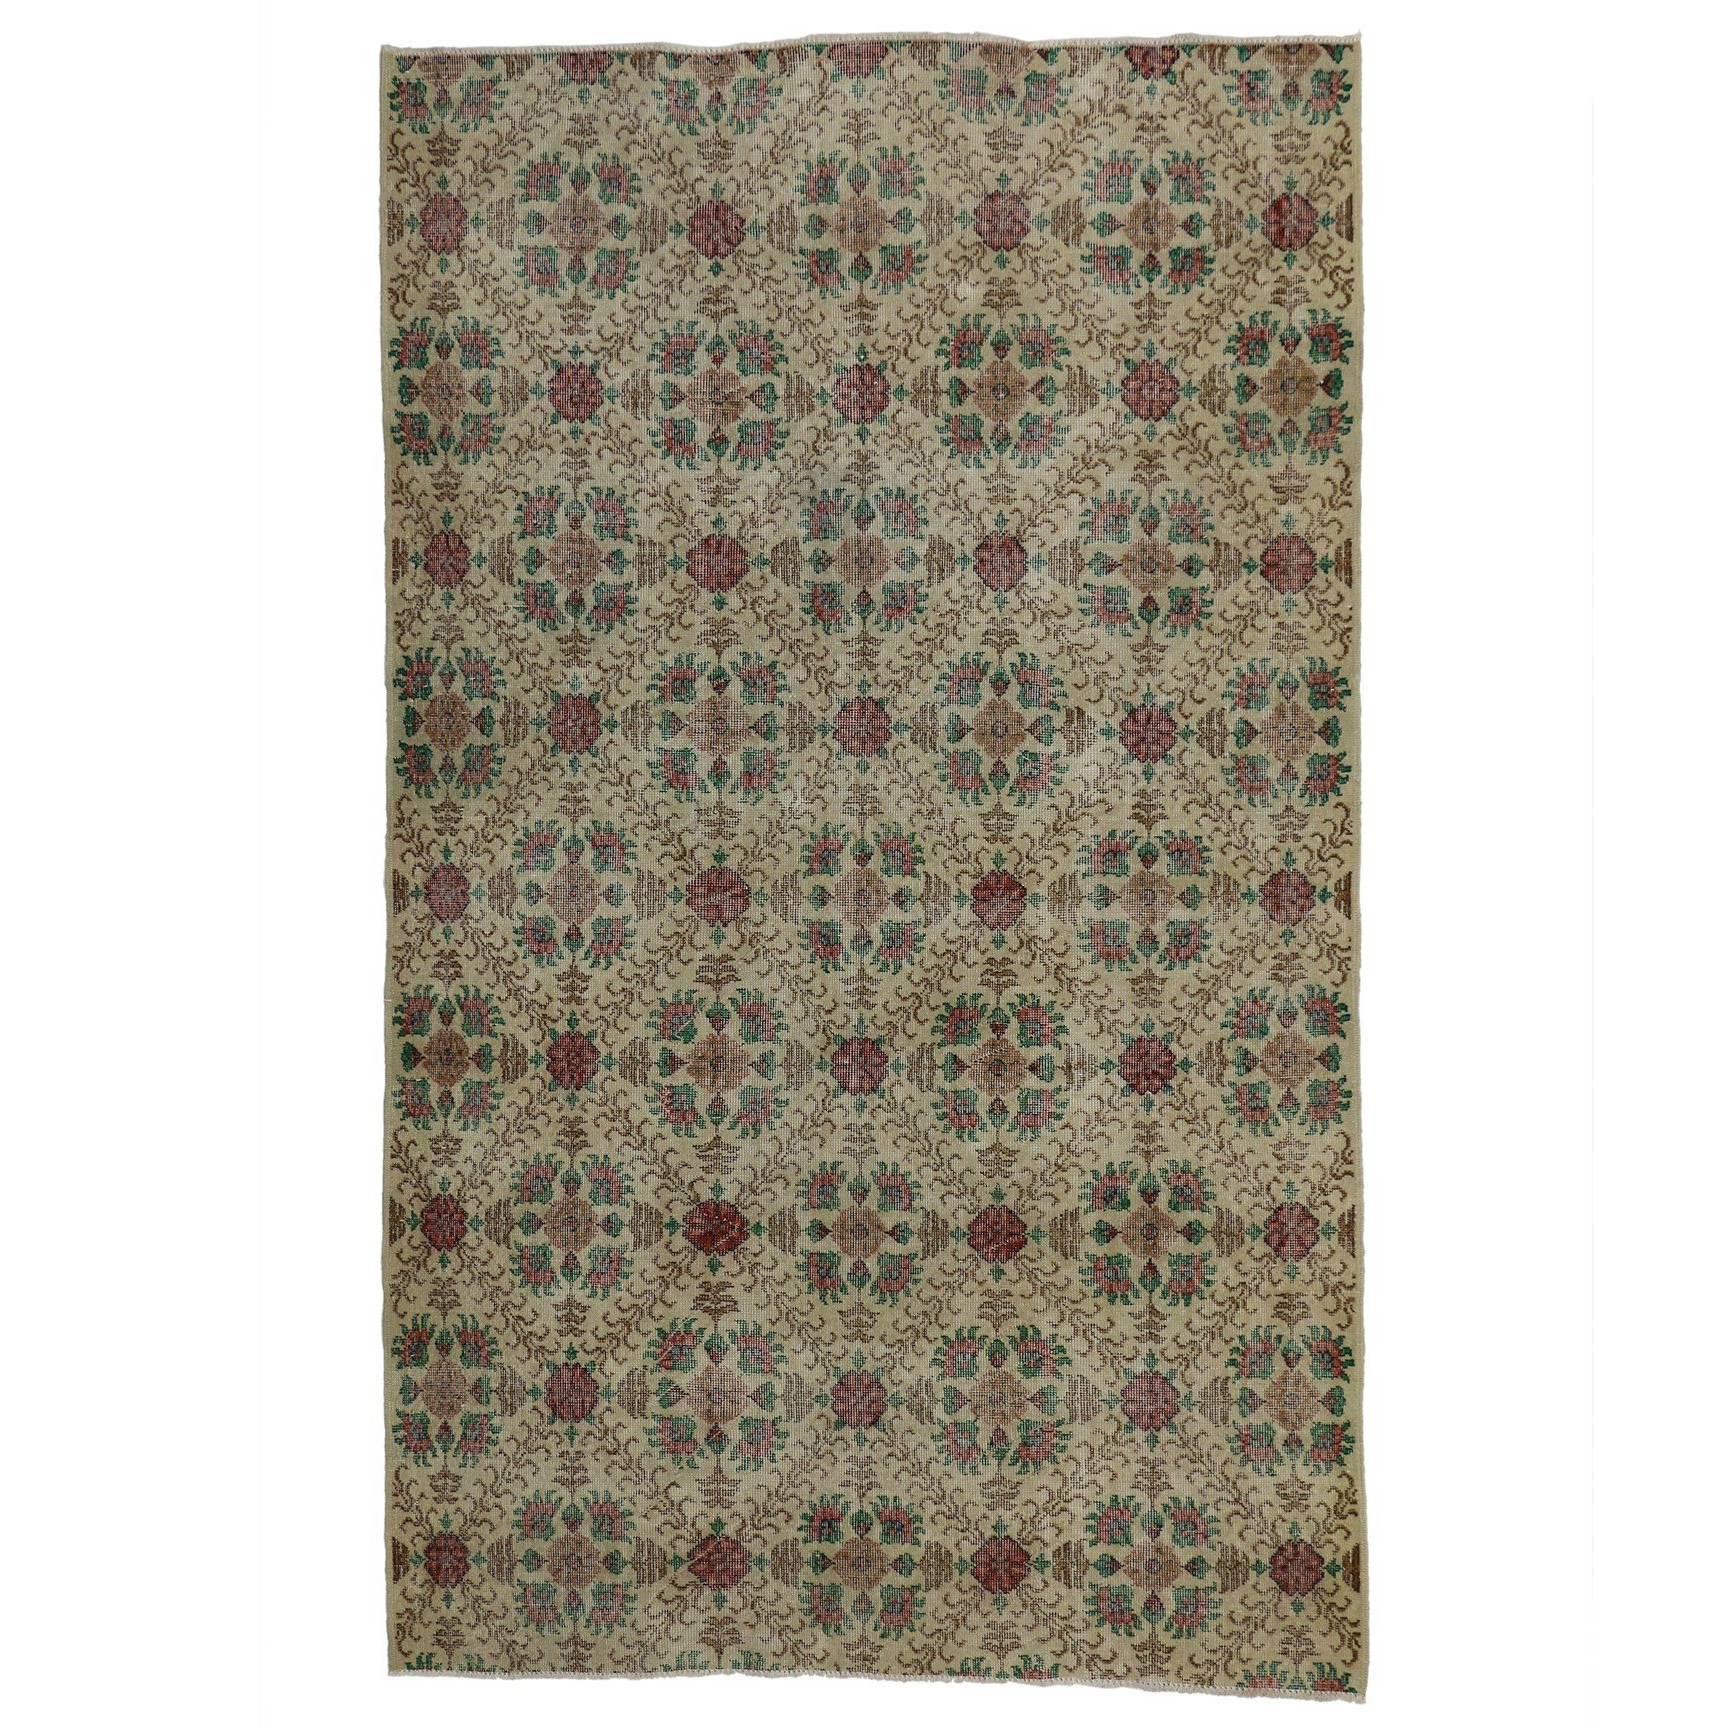 Distressed Turkish Sivas Rug with Shabby Chic English Country Cottage Style